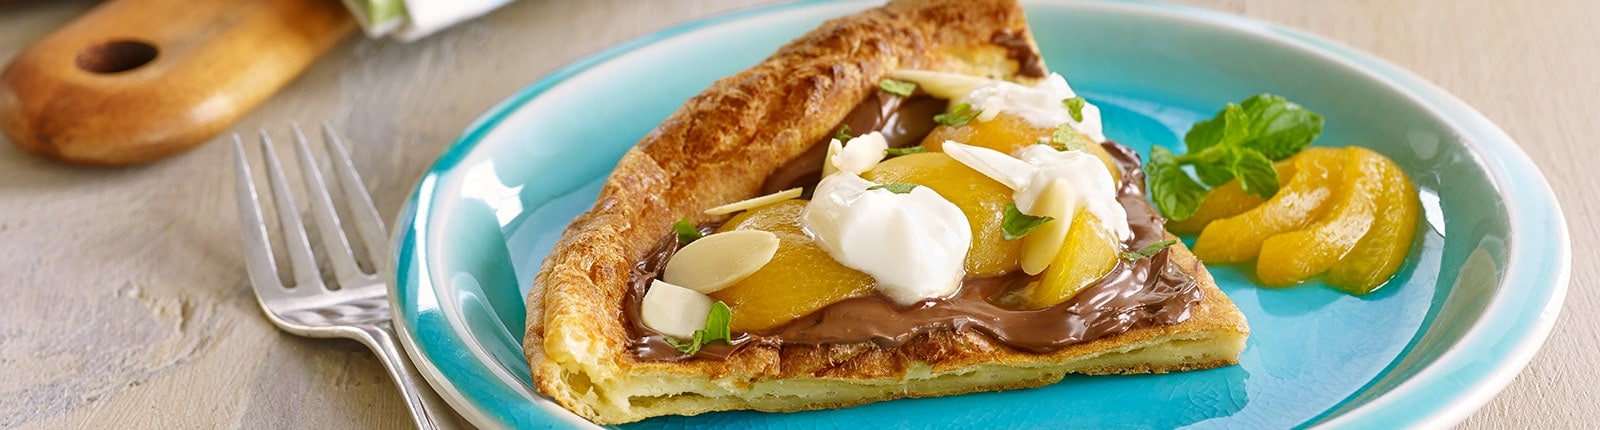 German pancake with apricot and Nutella<sup>®</sup>